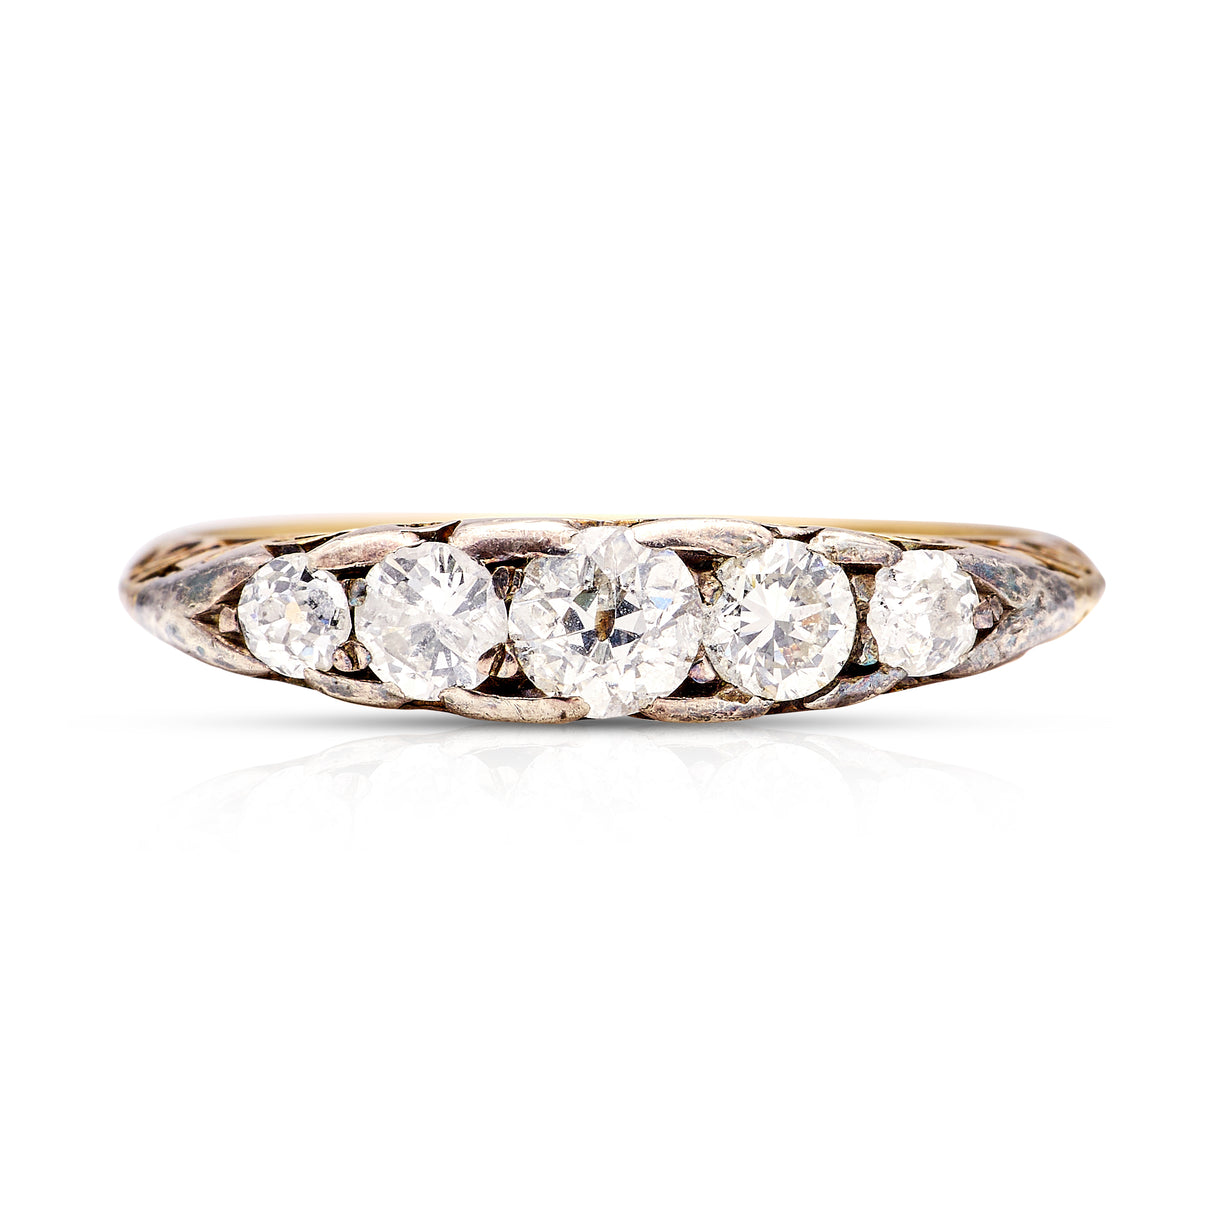 Antique, Edwardian five-stone diamond ring, 18ct yellow gold and platinum